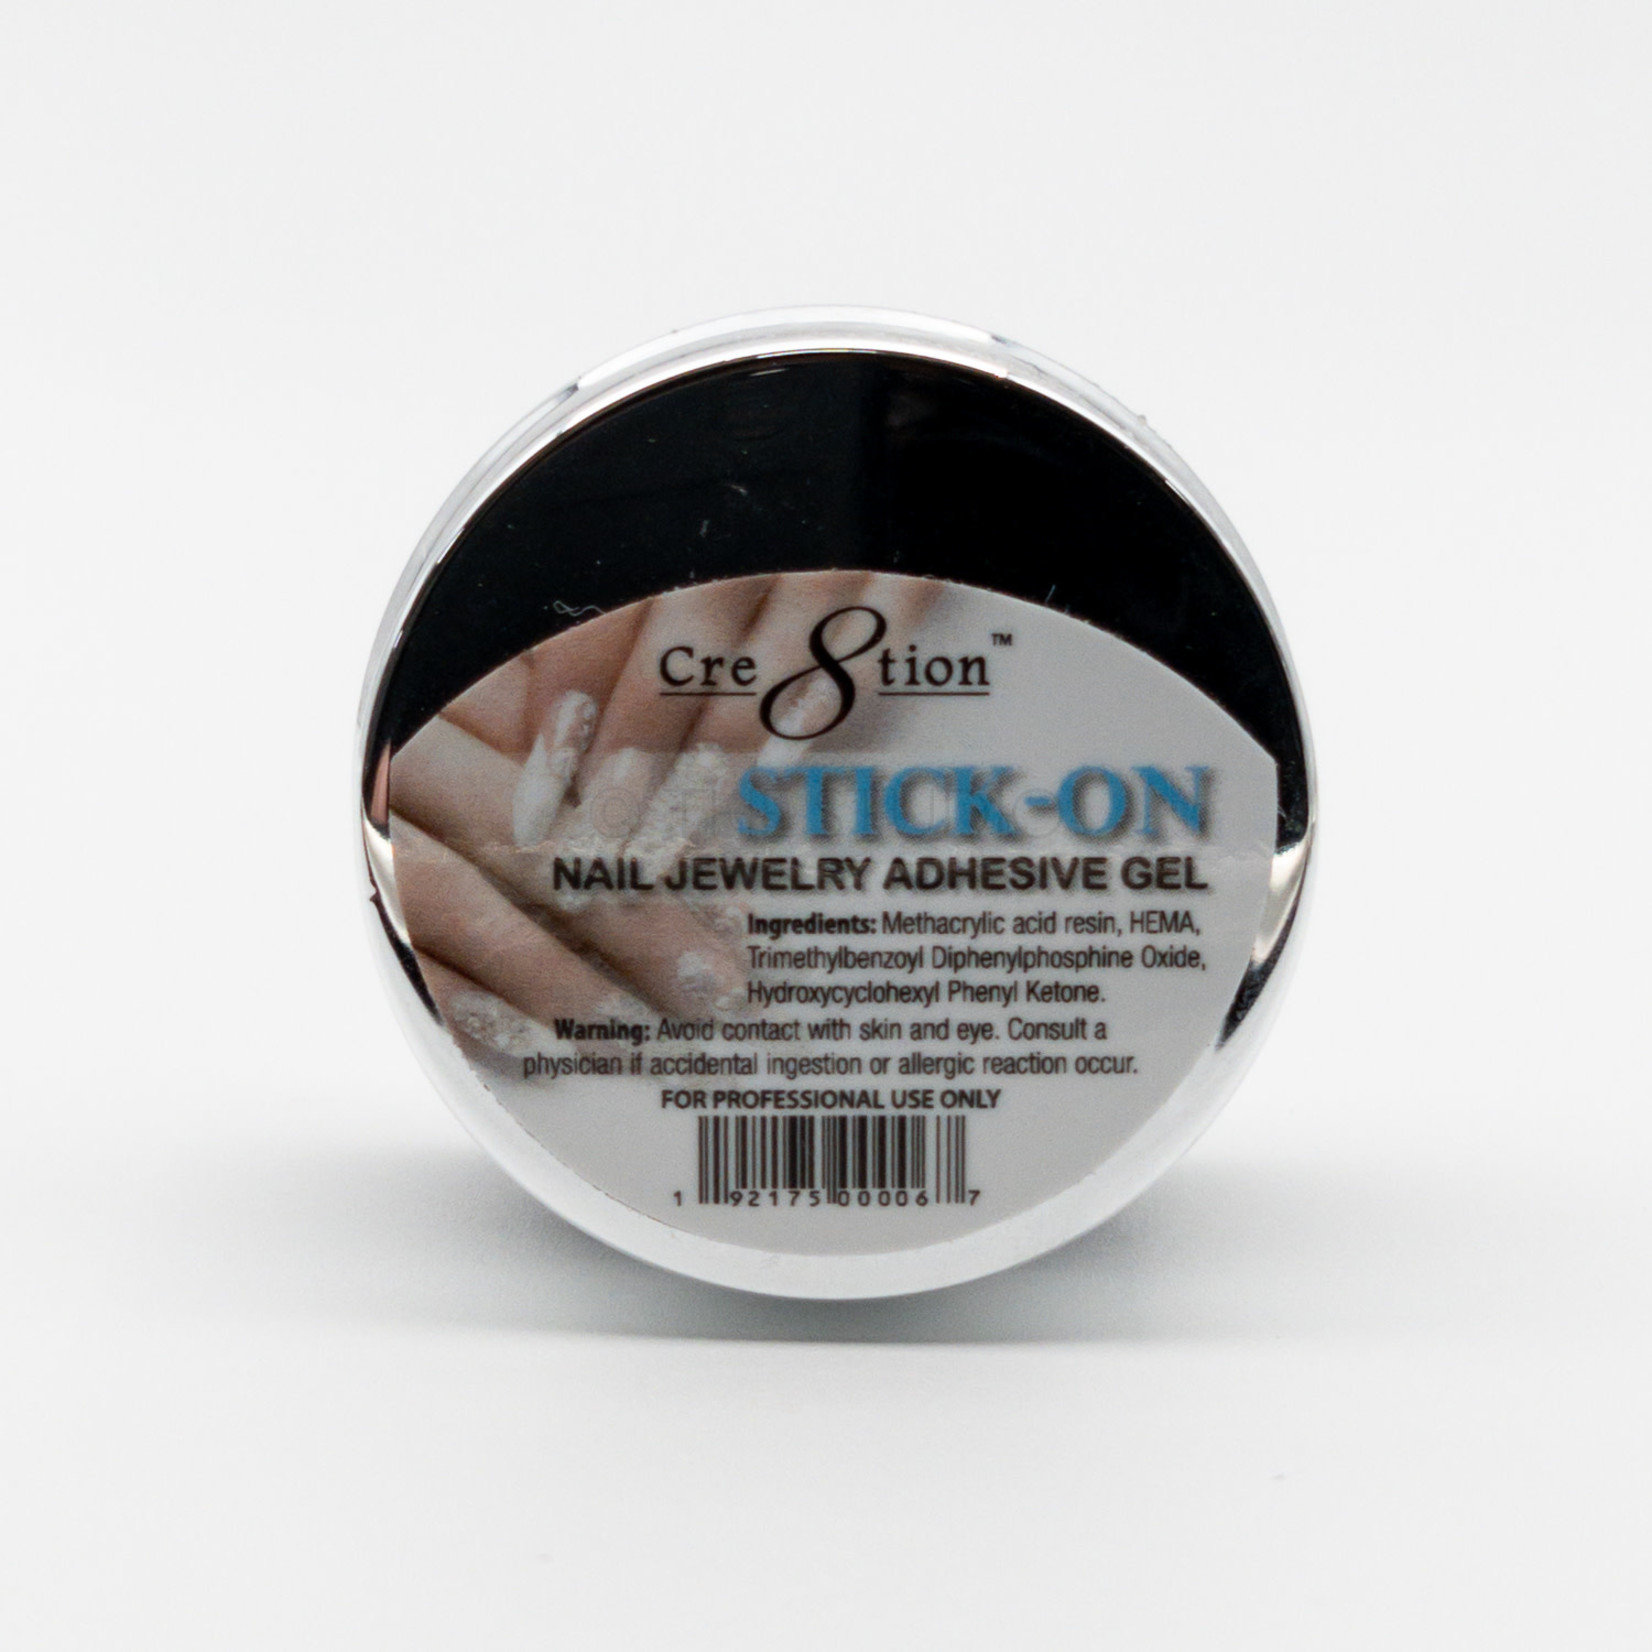 Cre8tion Cre8tion - Rhinestone Gel - Stick on glue - Nail Jewelry Adhesive - 7.5 g